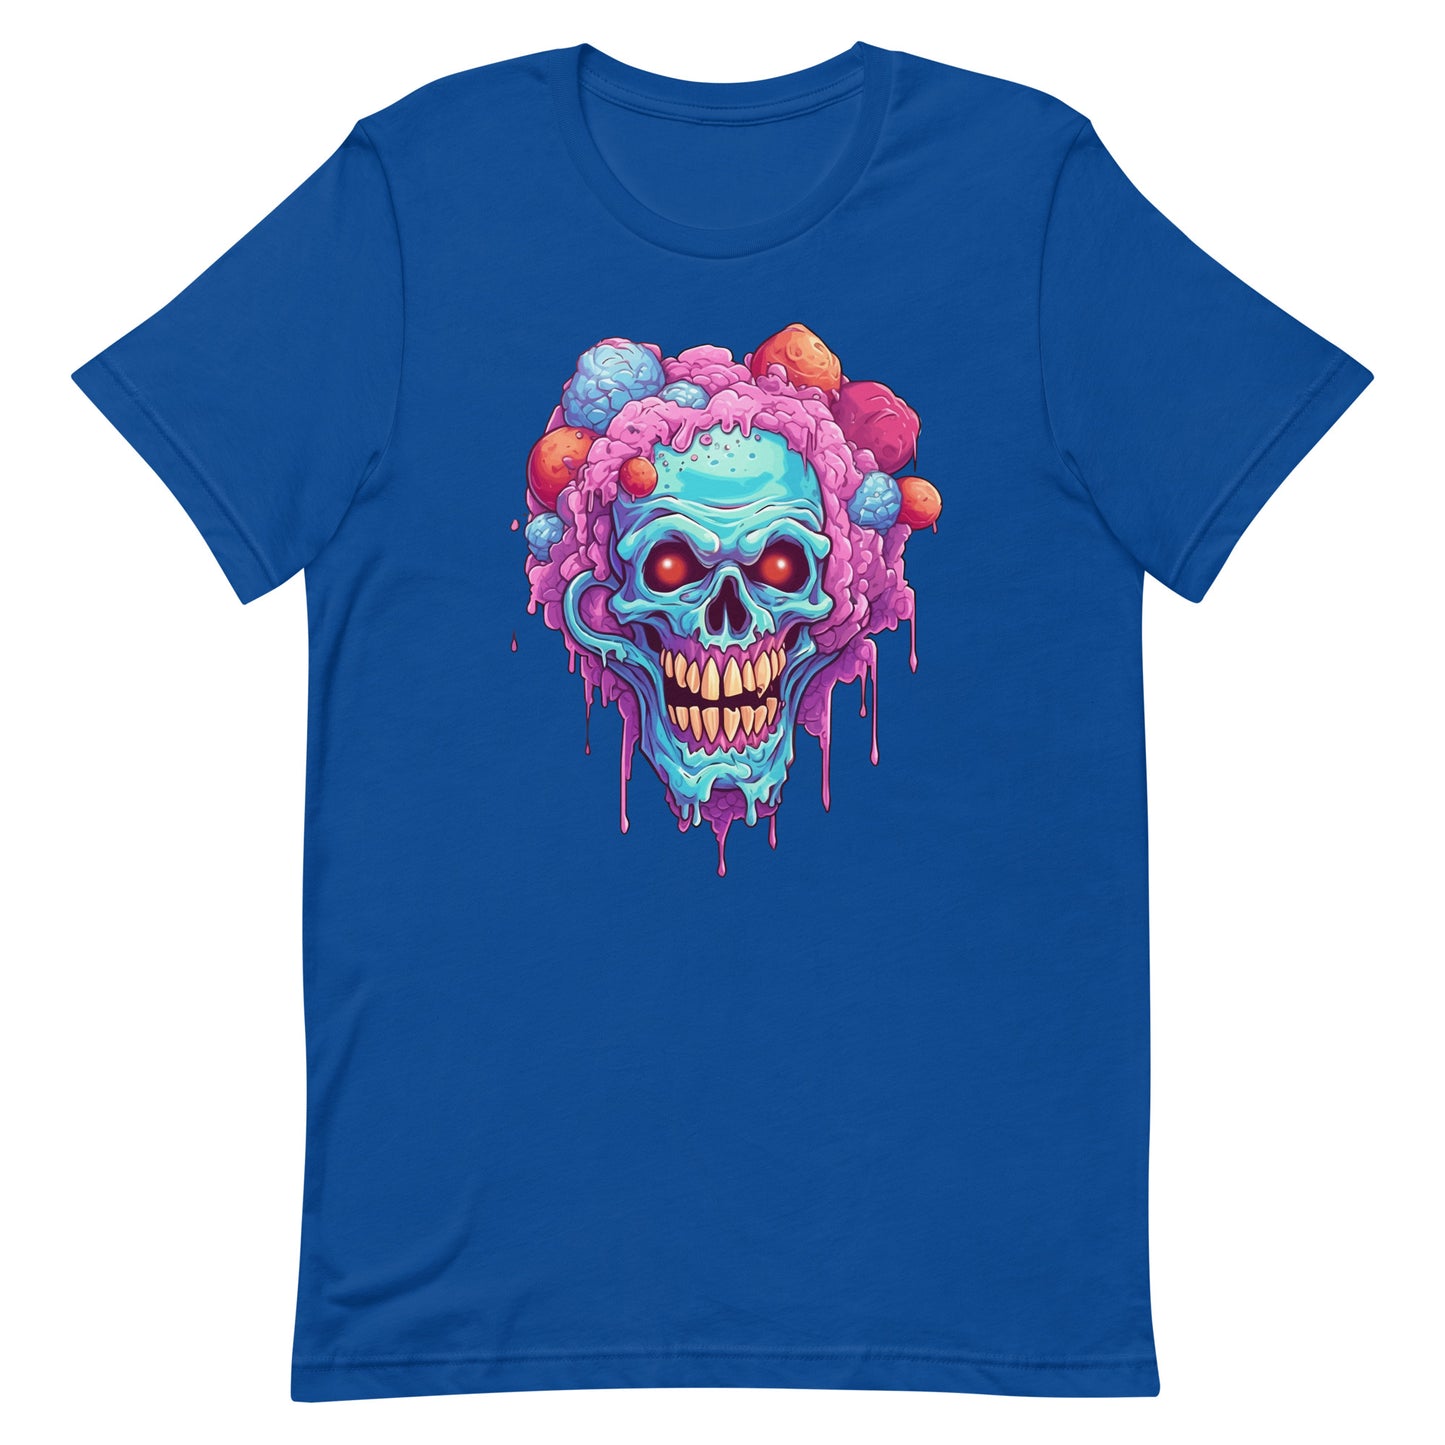 Skull head that has a purple and blue candy, Ice cream skull and red eyes, Creepy clown, Cartoon skull with crazy hair and dripping cola - Unisex t-shirt